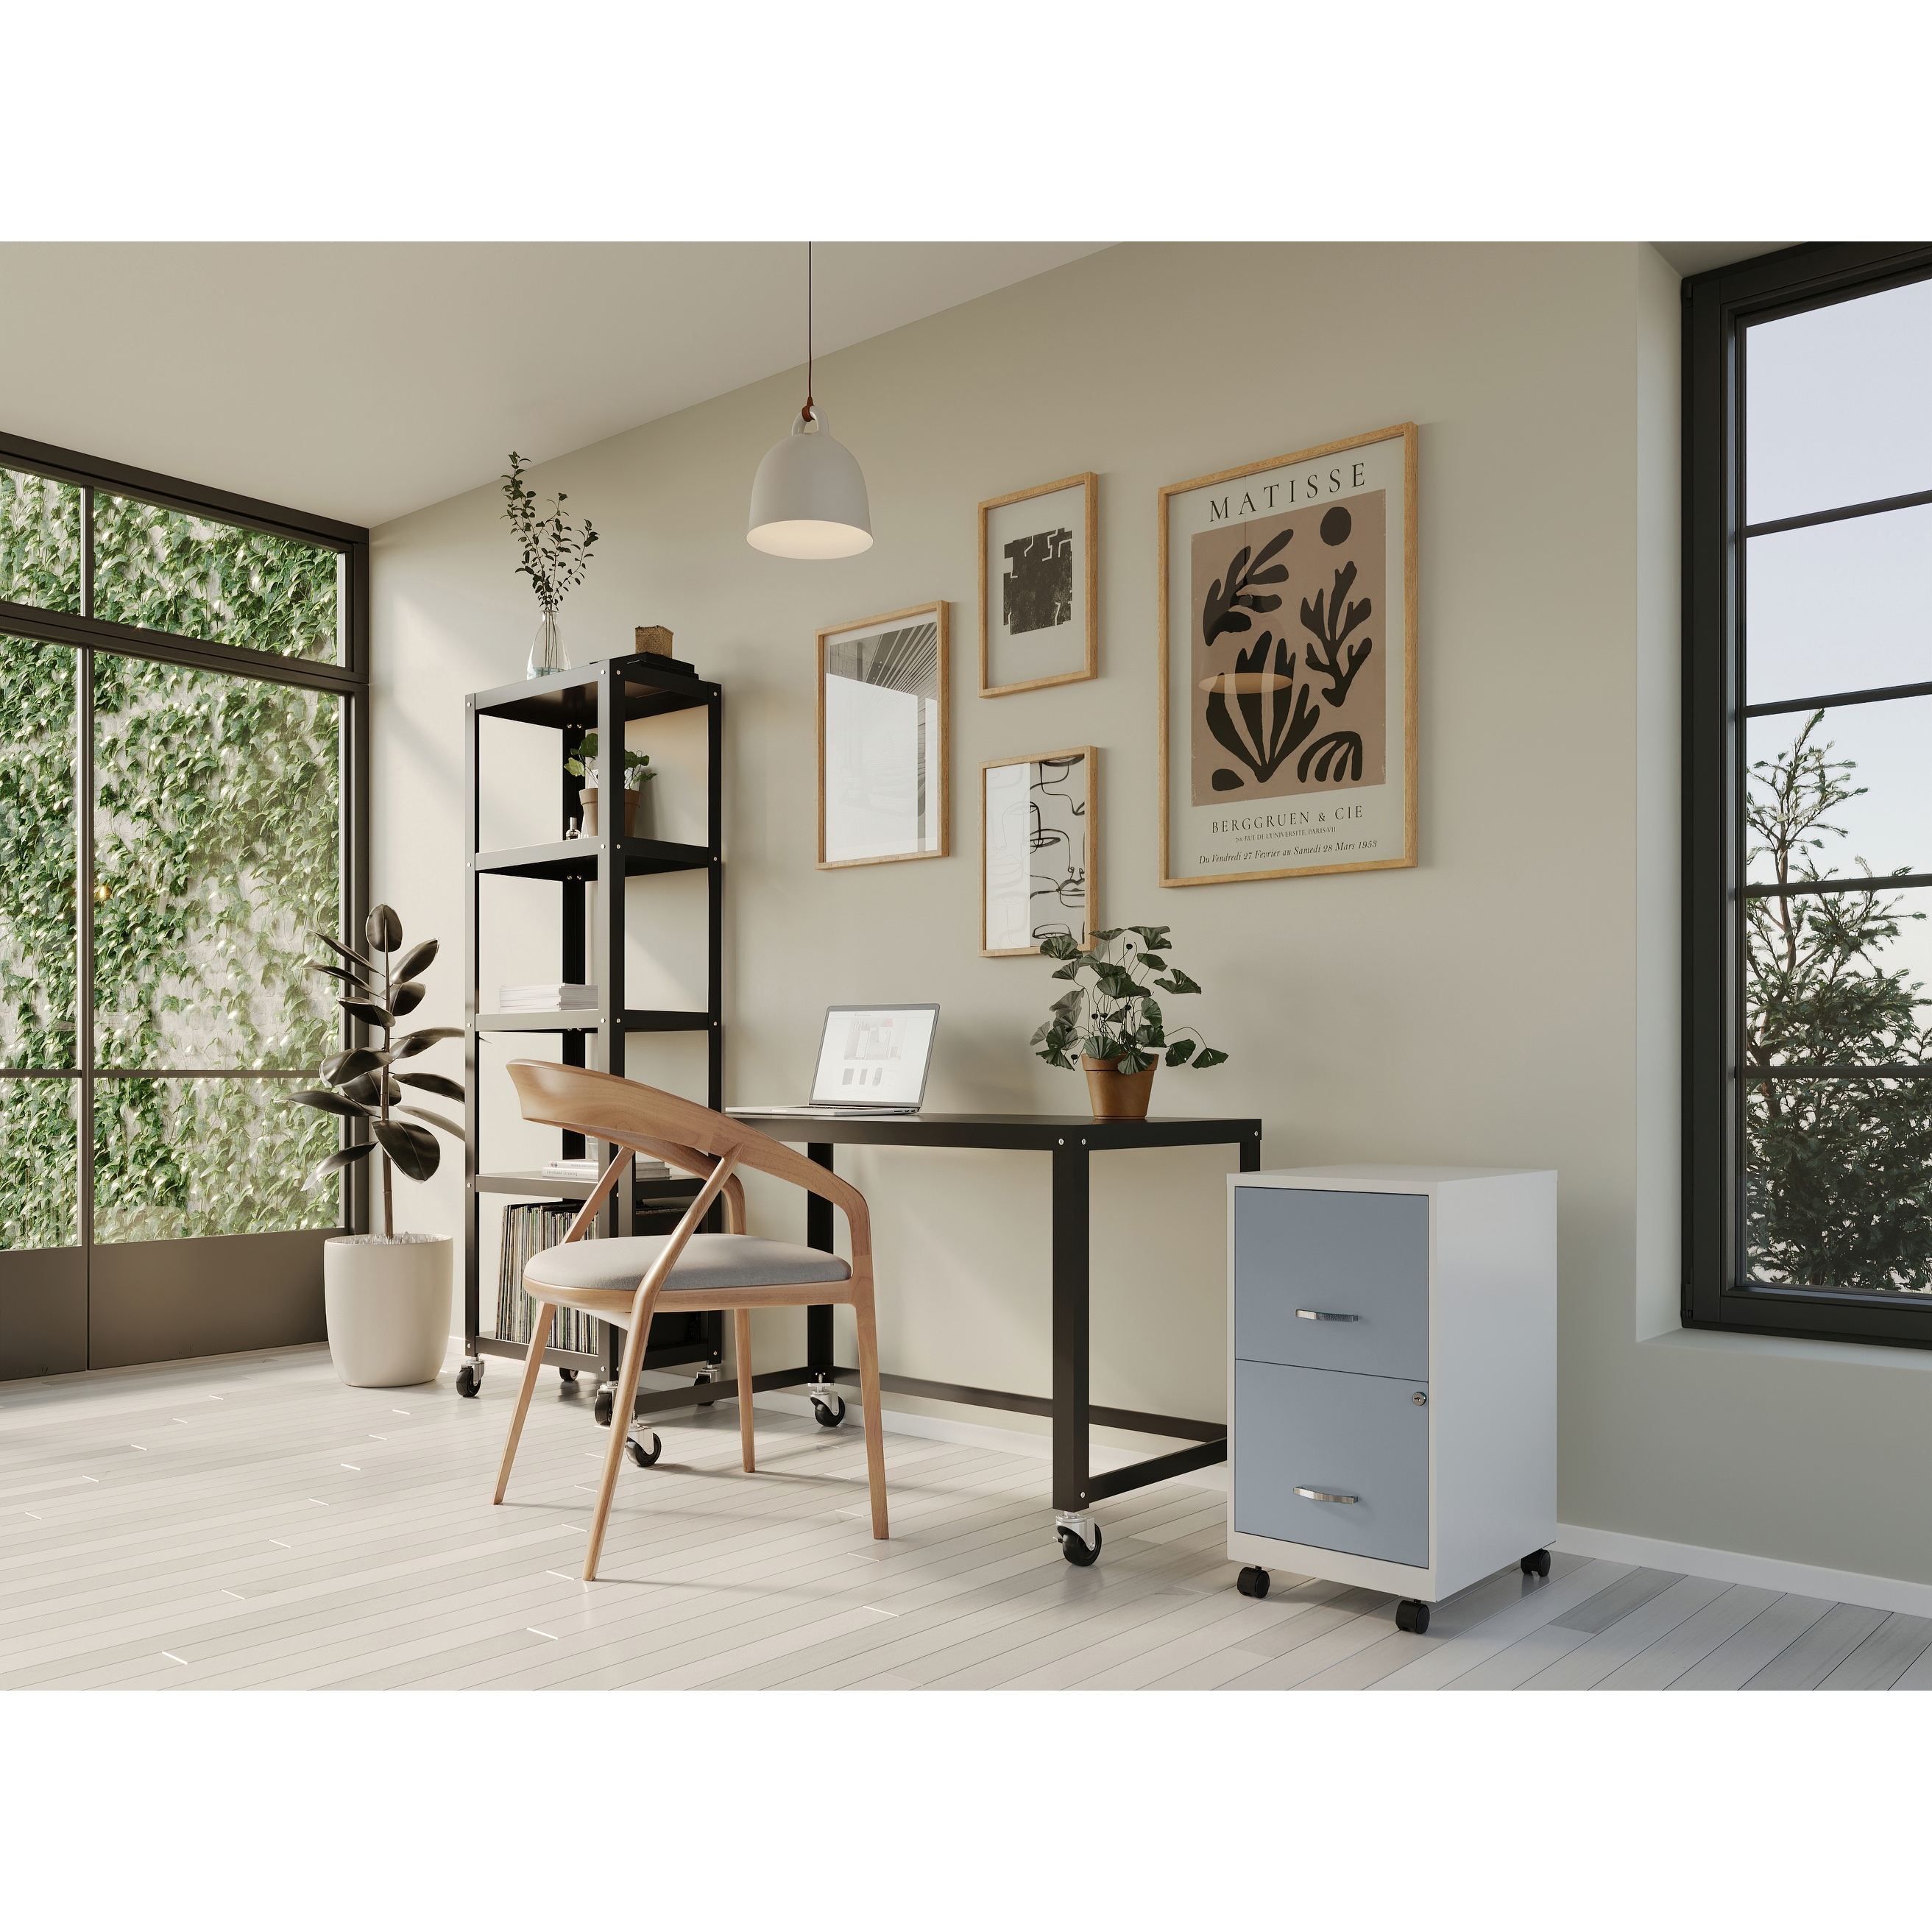 https://ak1.ostkcdn.com/images/products/is/images/direct/2d5f3325aa7d5b3282fe111ffeec2e452bbabbe1/Space-Solutions-Pearl-White-2-drawer-Mobile-File-Cabinet.jpg